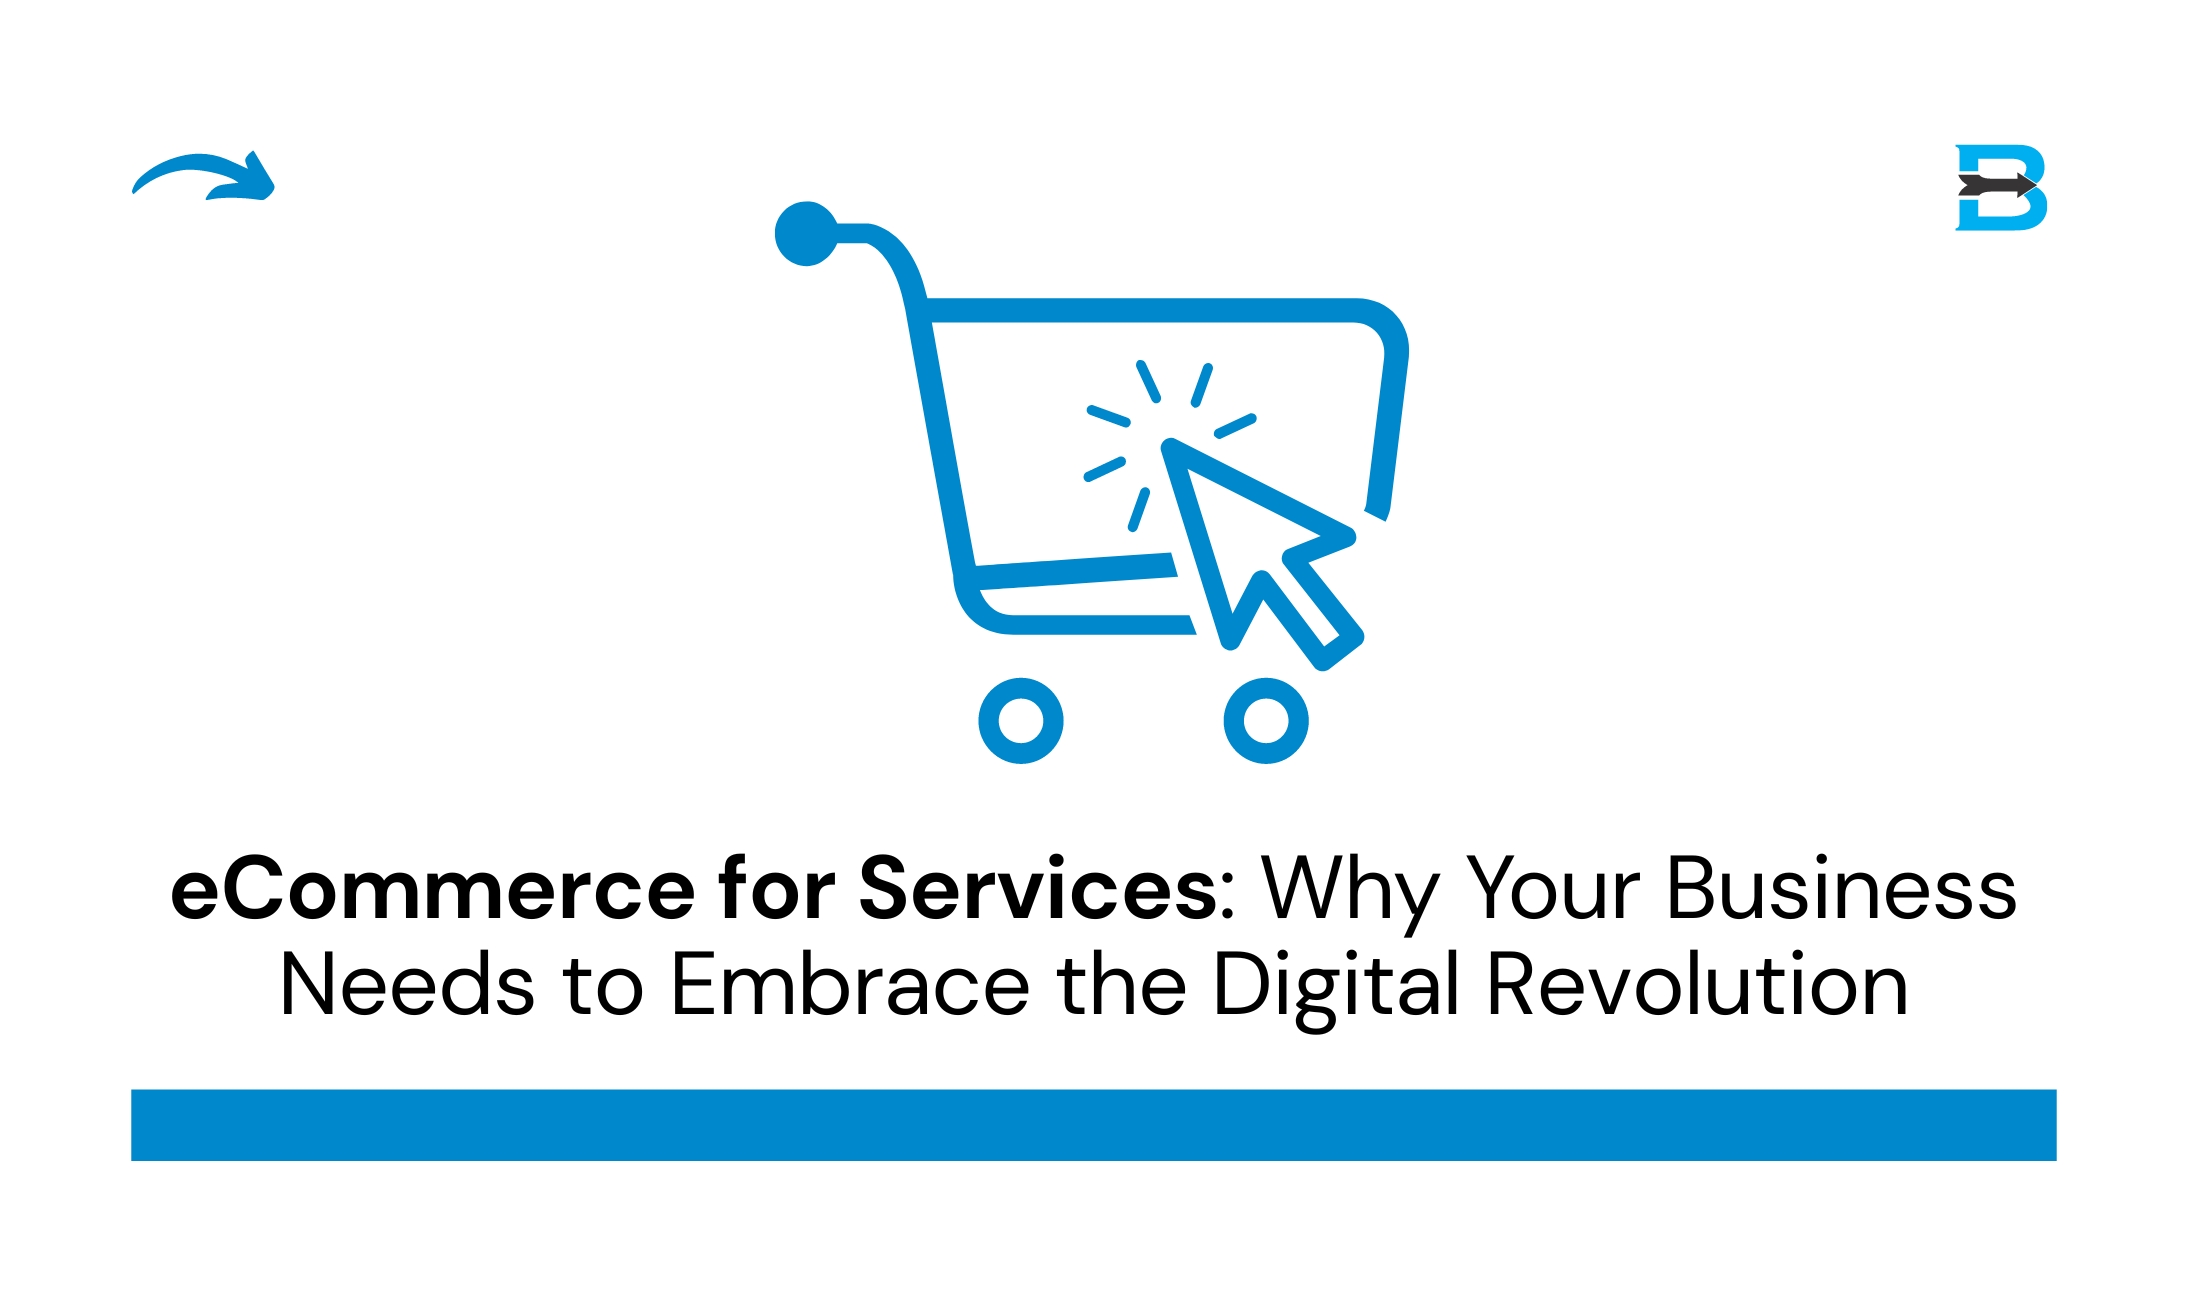 eCommerce for Services Why Your Business Needs to Embrace the Digital Revolution